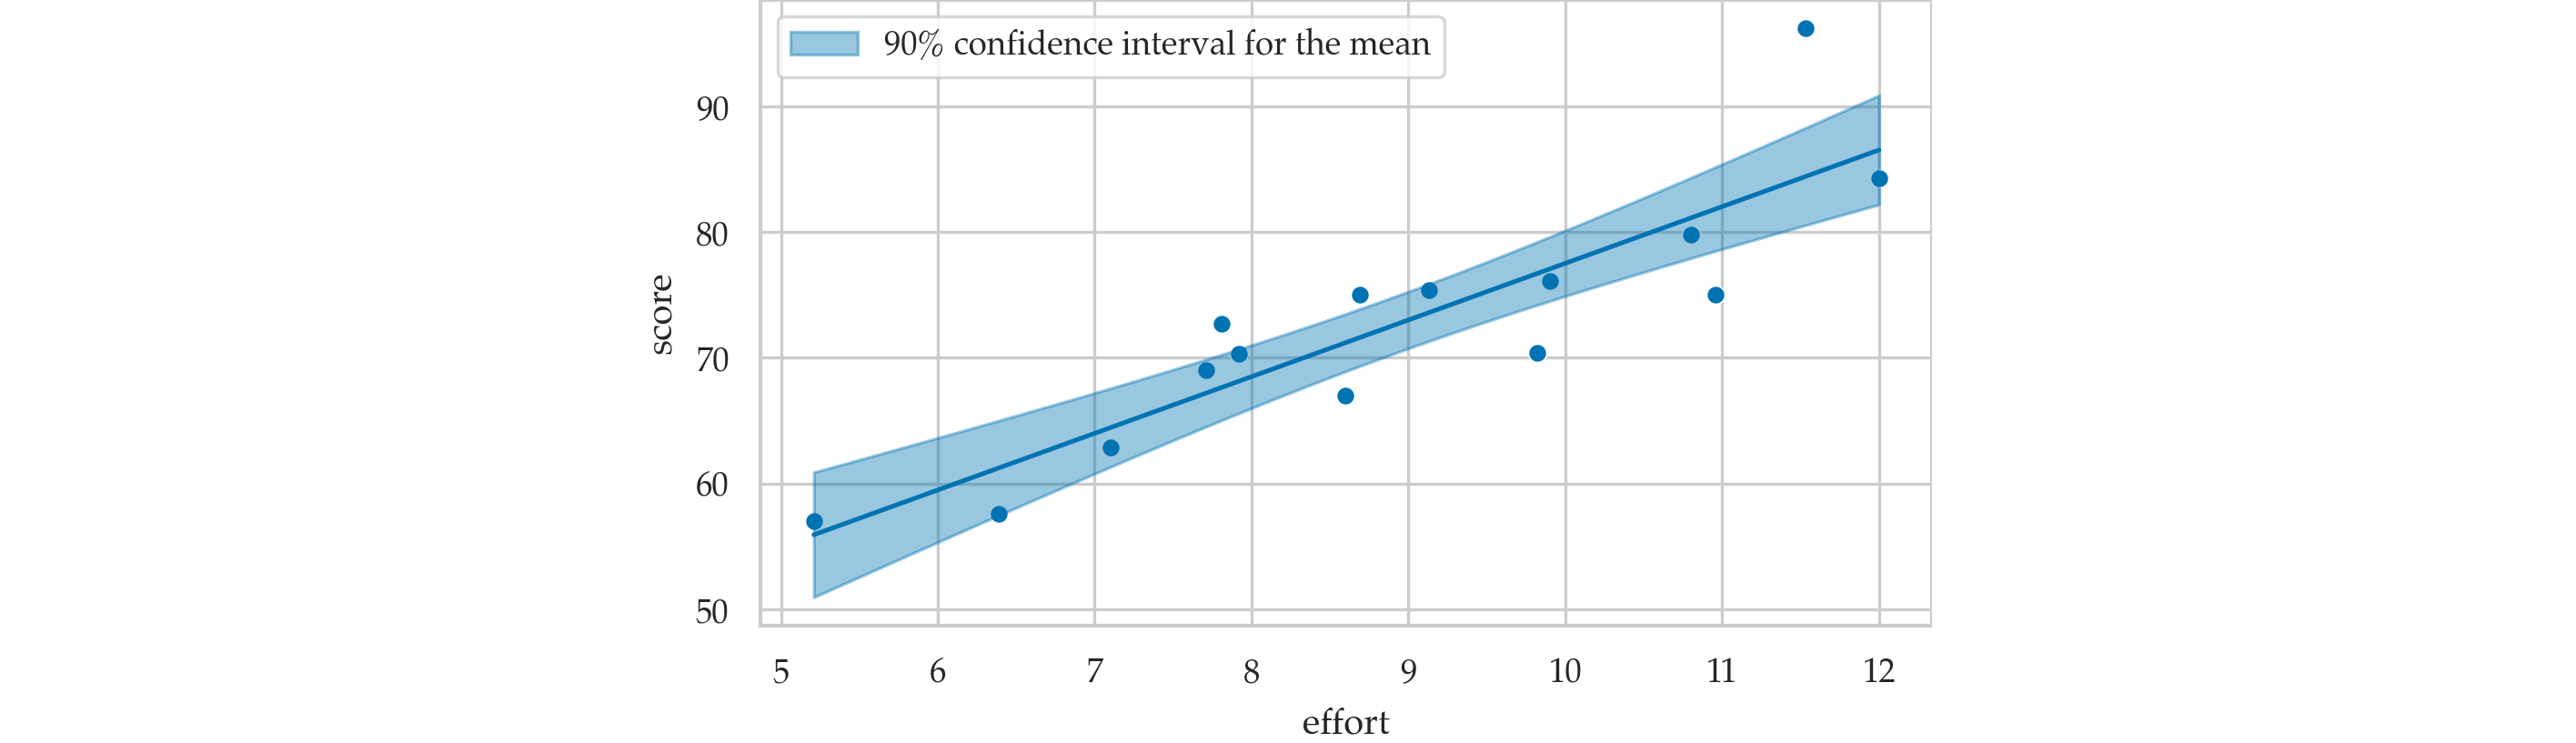 Plot of the 90% confidence interval for the mean